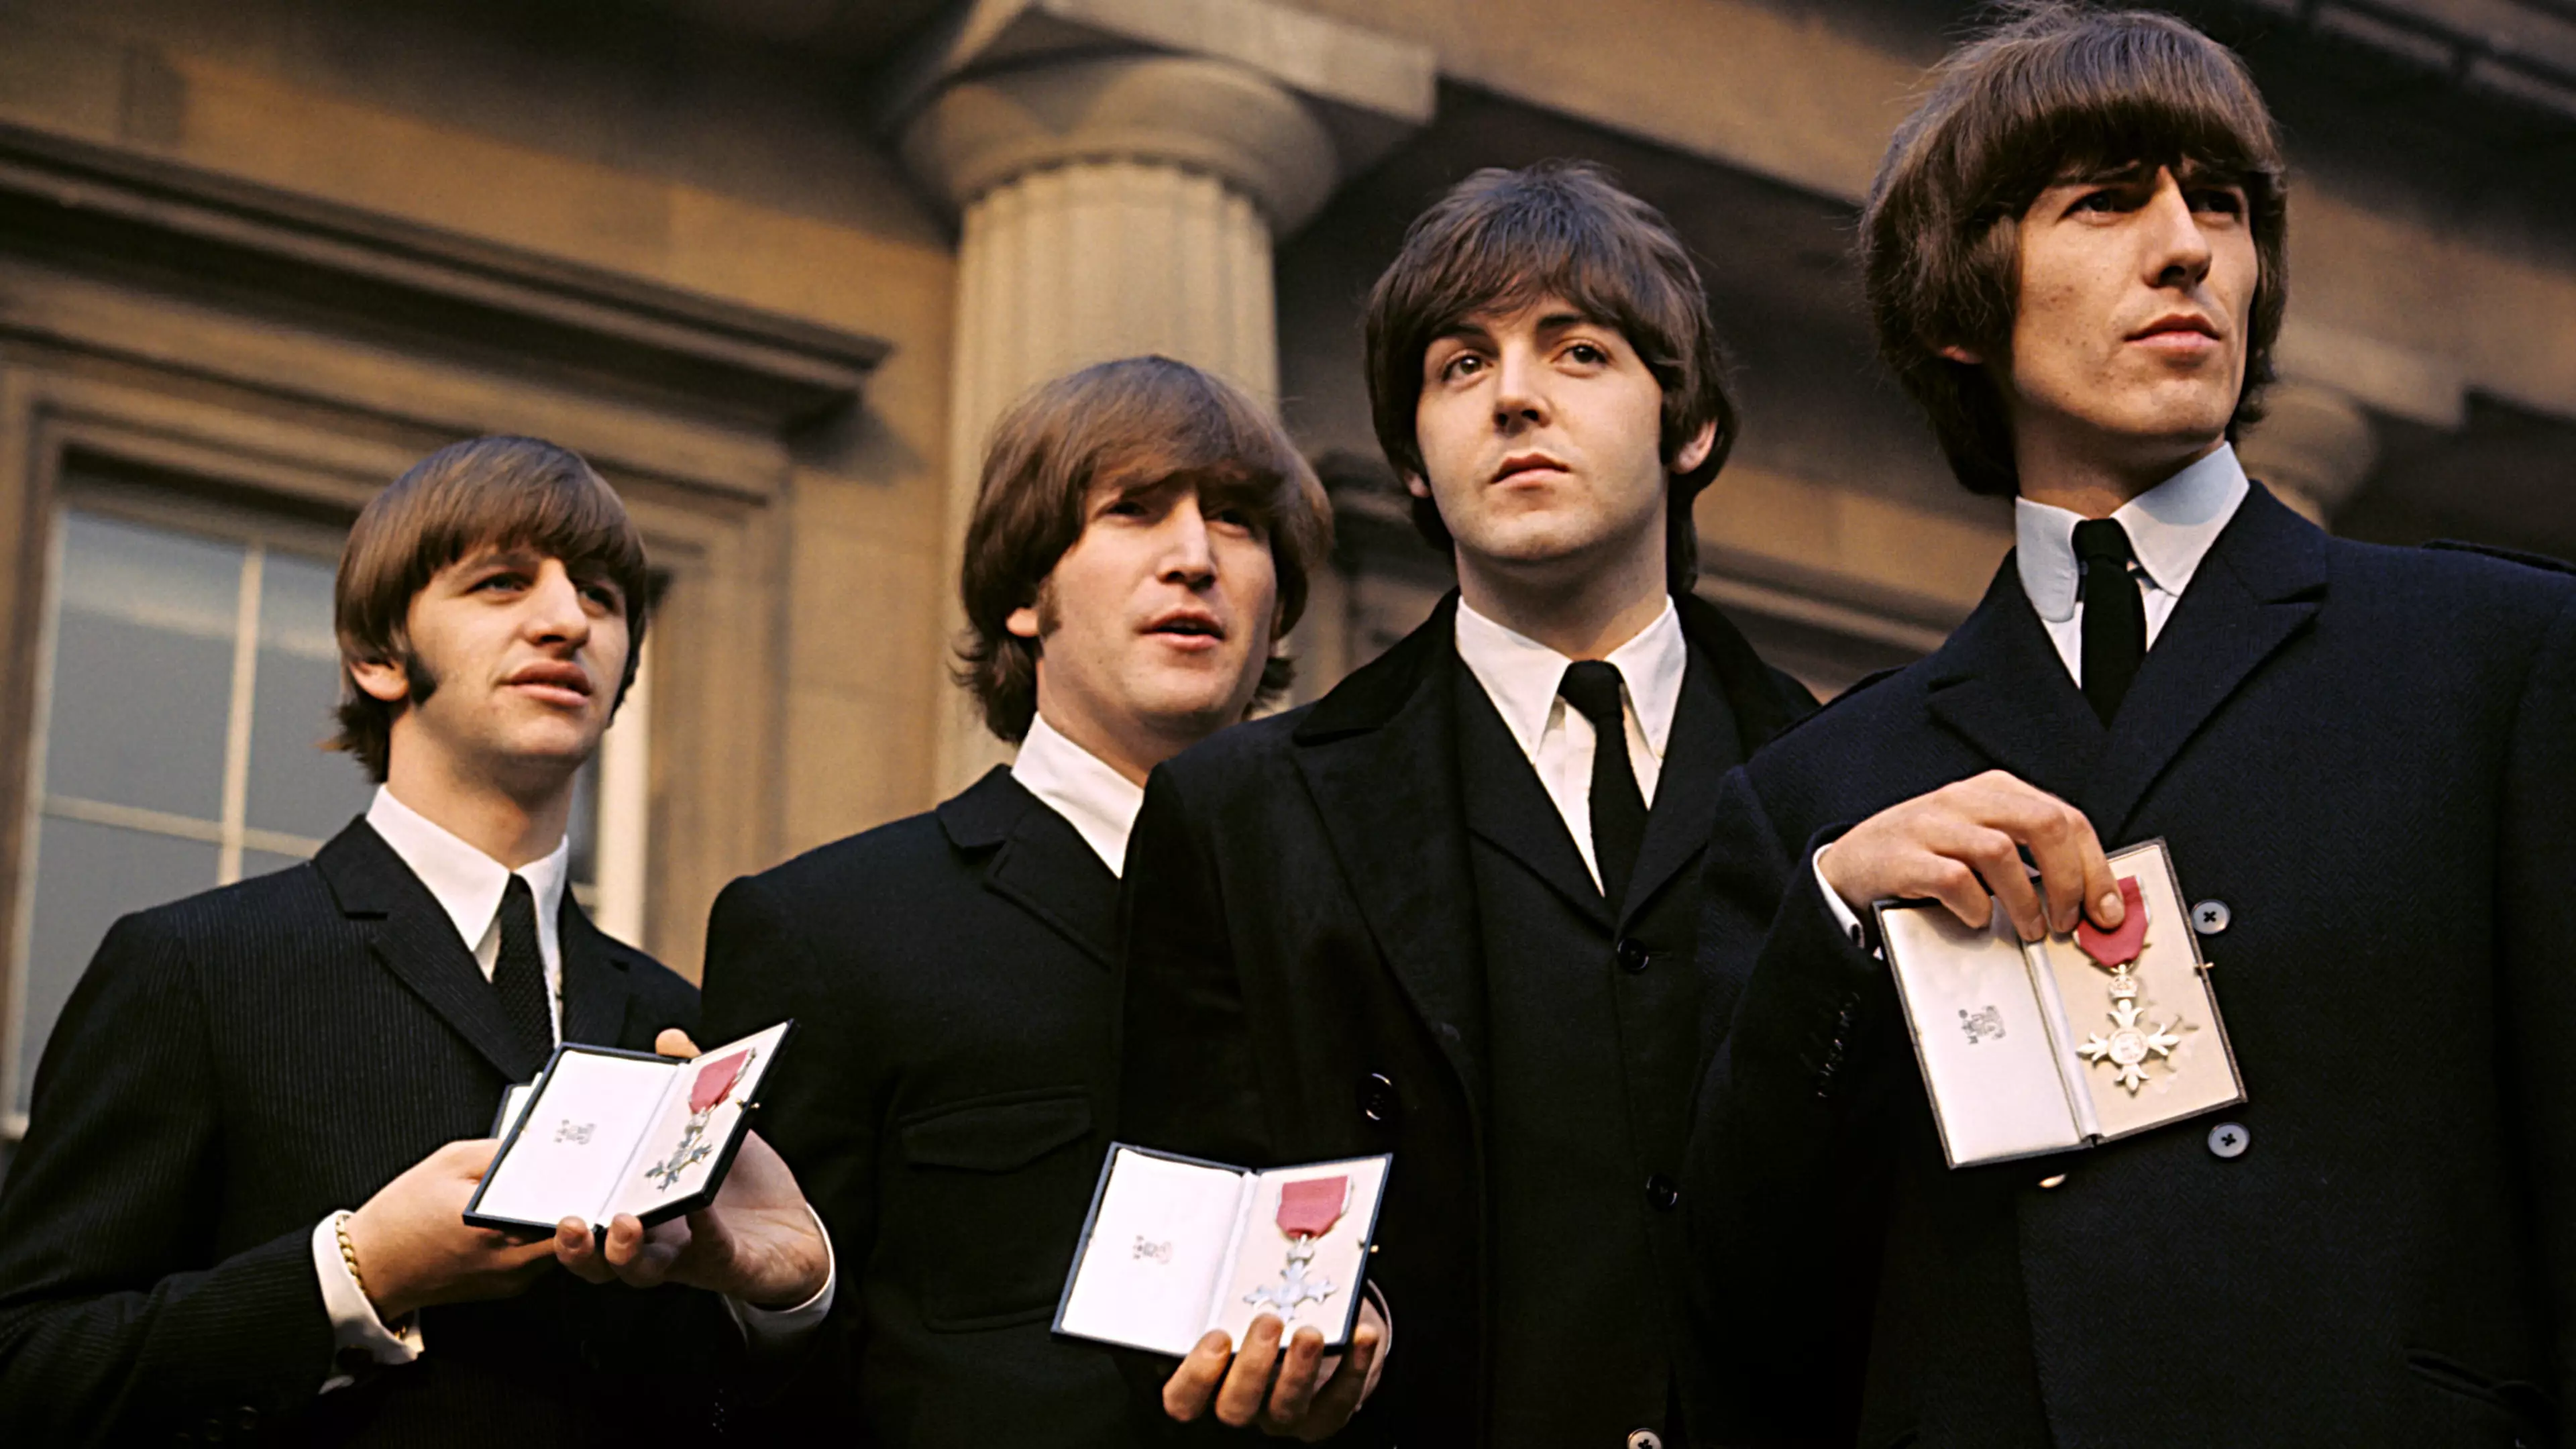 Special 50th Anniversary Editions Of The Beatles' White Album To Be Released